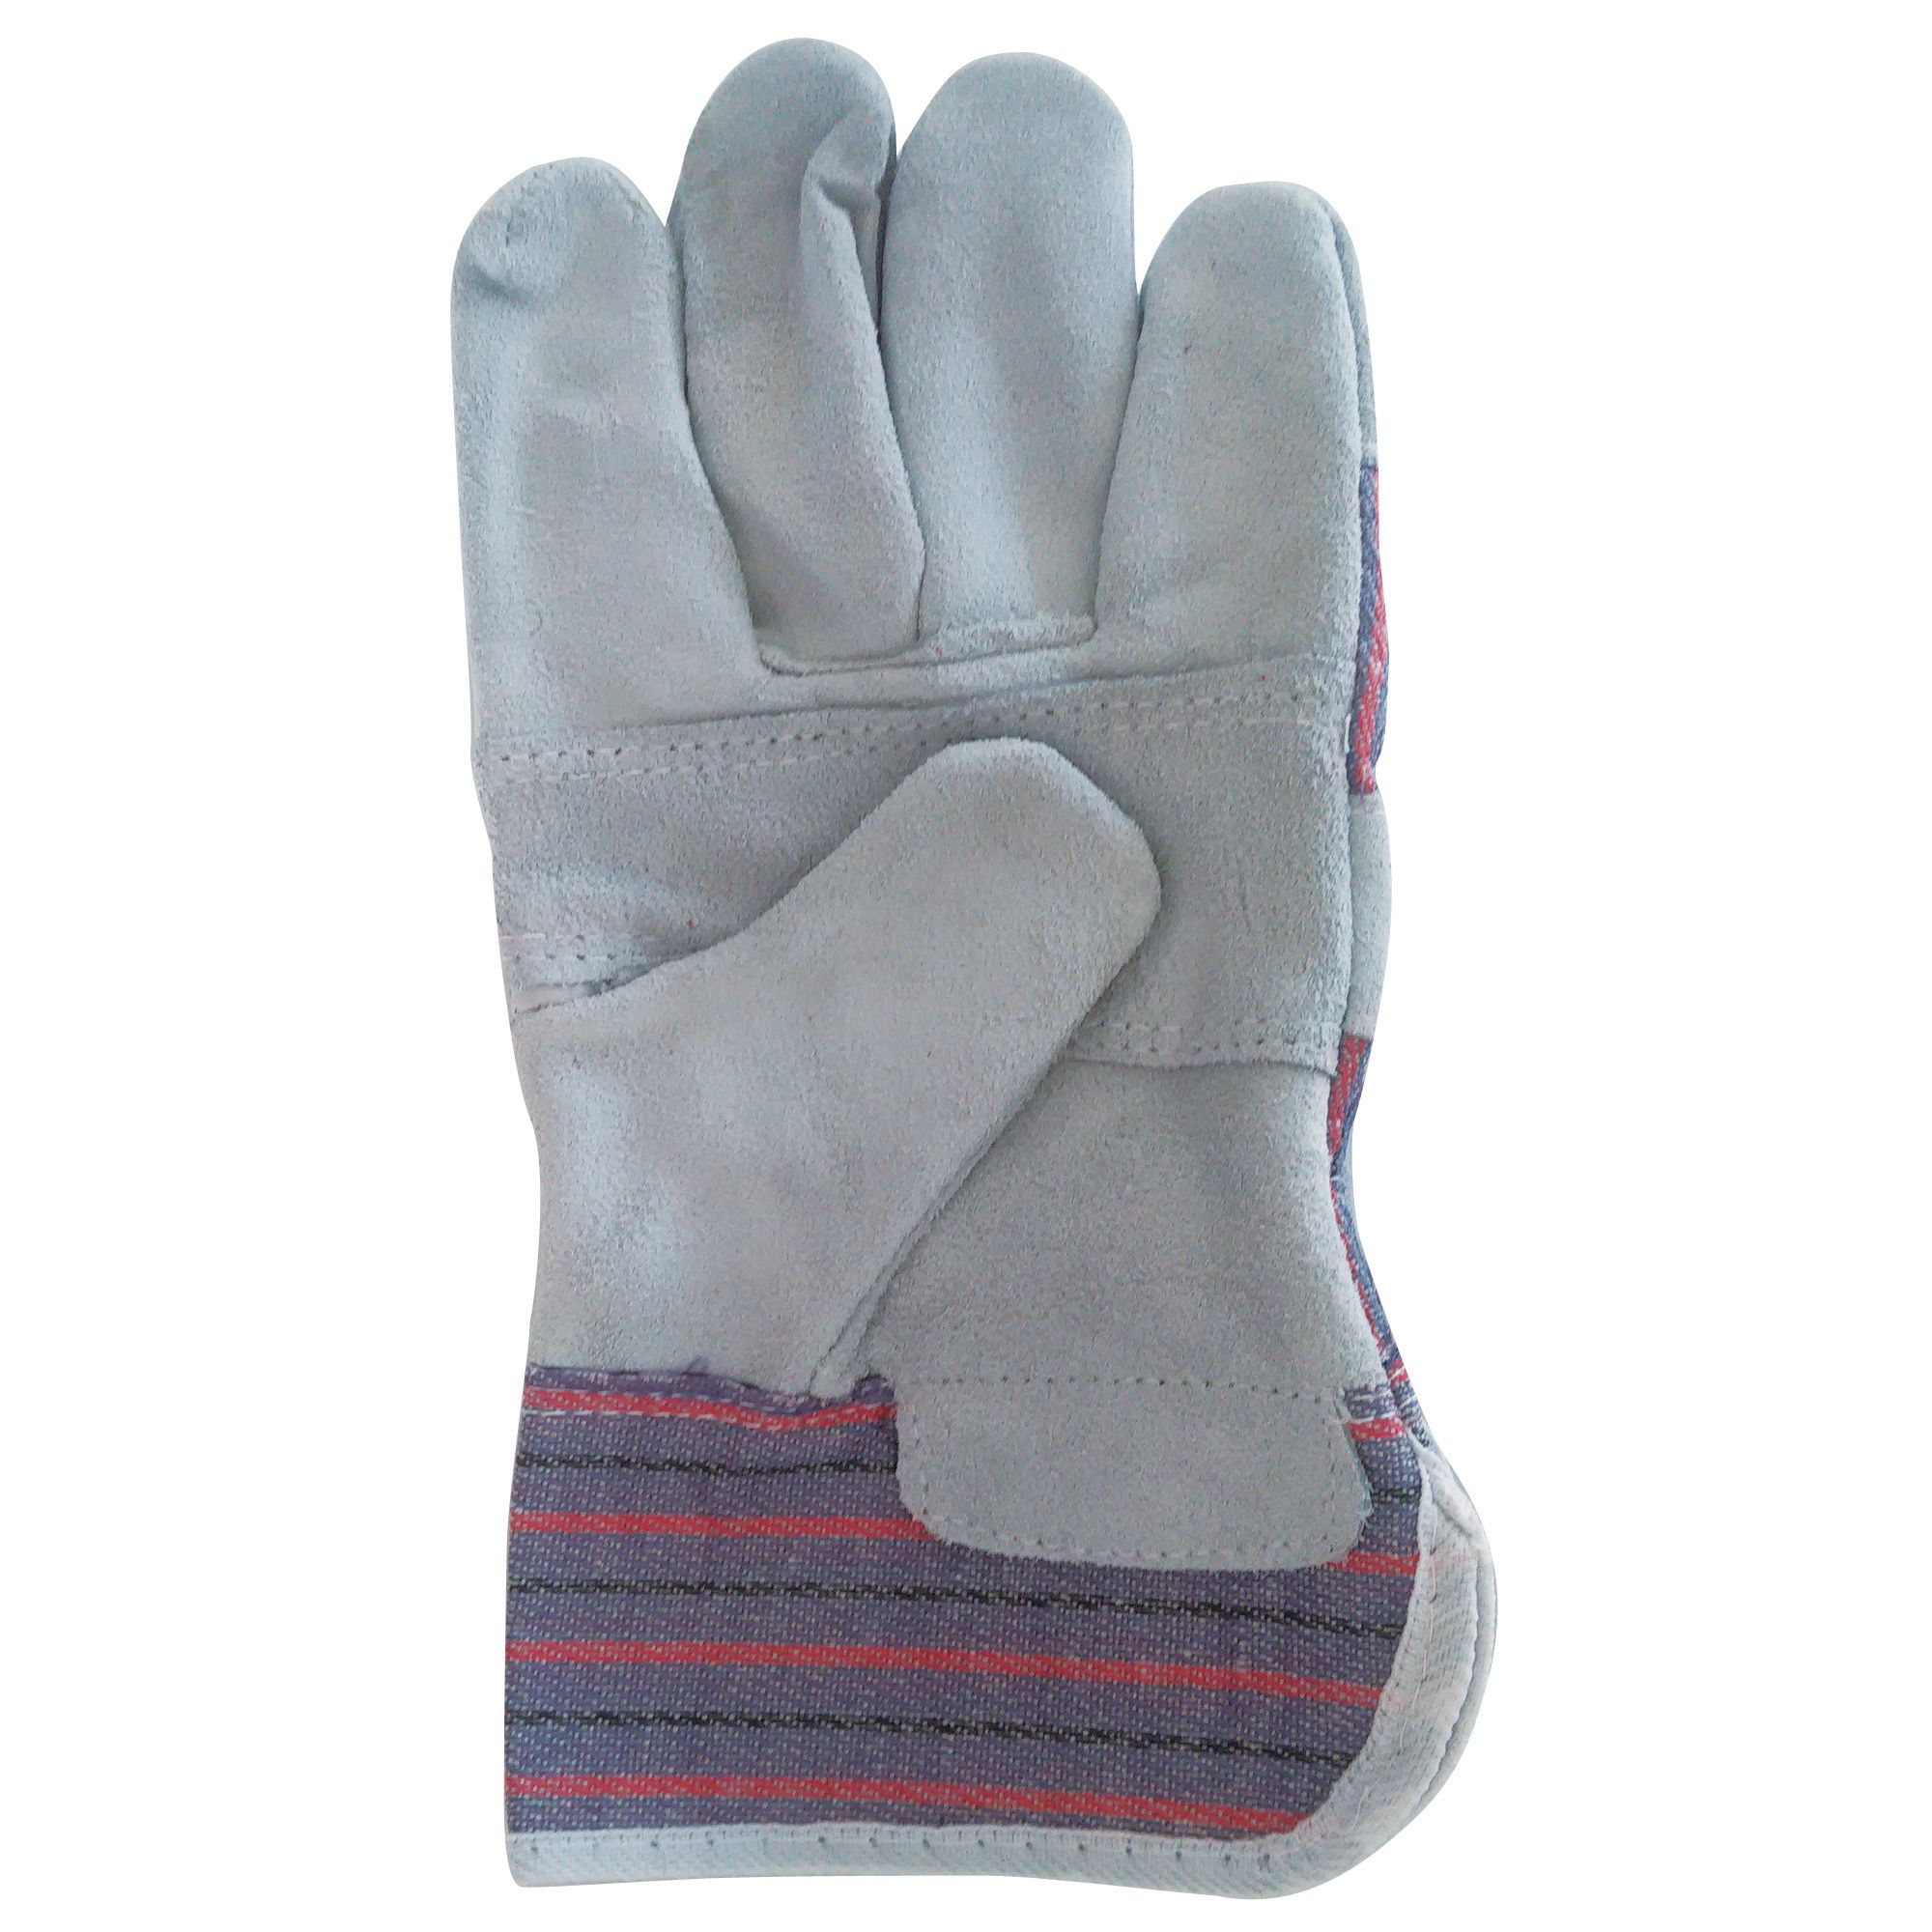 Image of Wickes Standard Grey Rigger Gloves - One Size